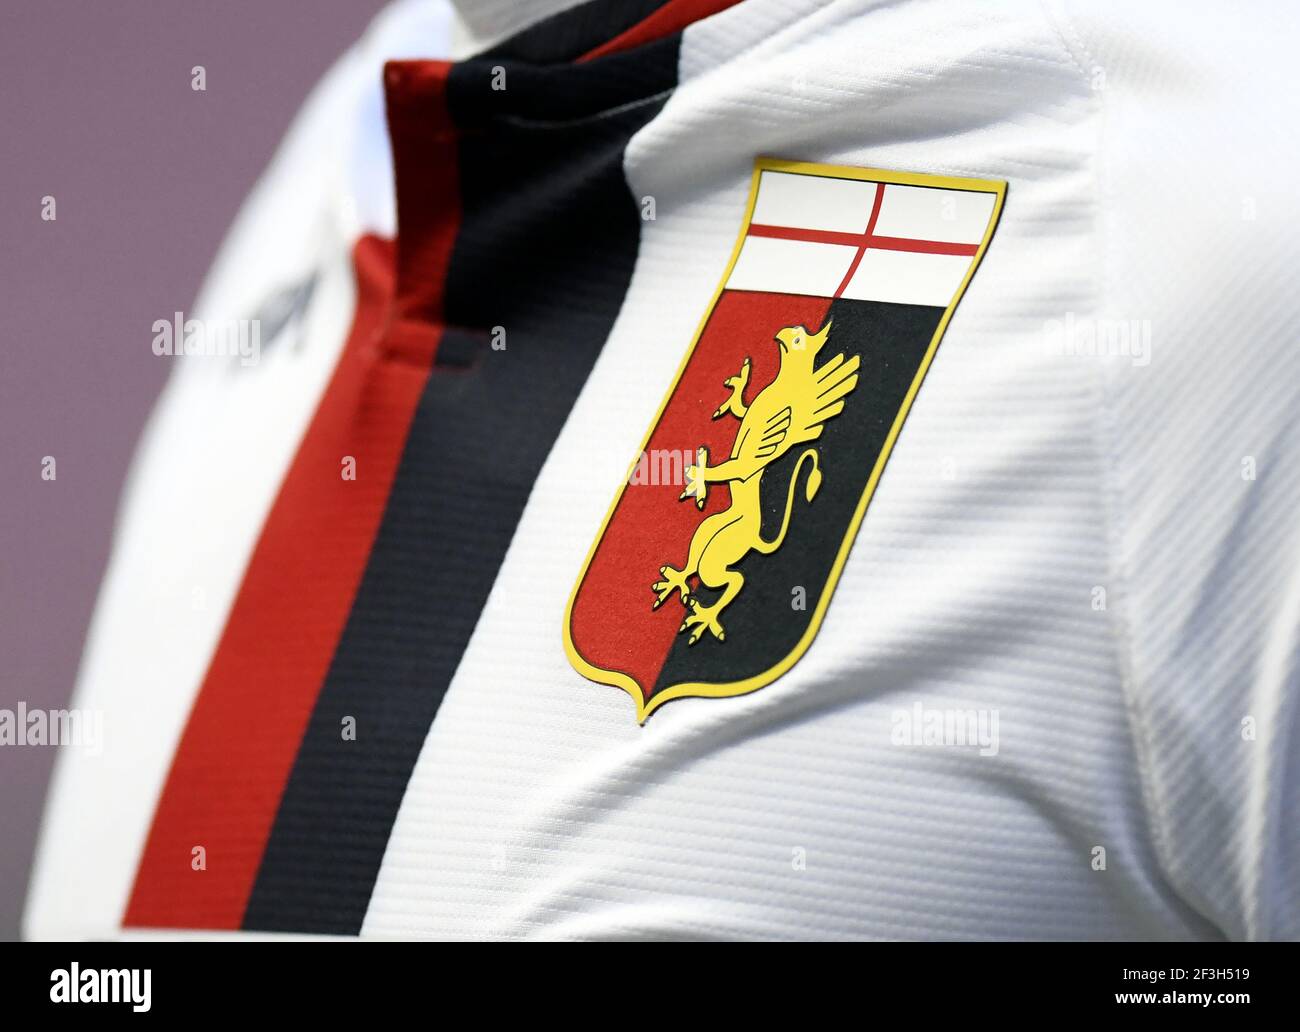 Genoa Cricket and Football Club's logo an symbol on the official team's uniform. Genoa is the oldest Italian football team founded on 1893. Stock Photo